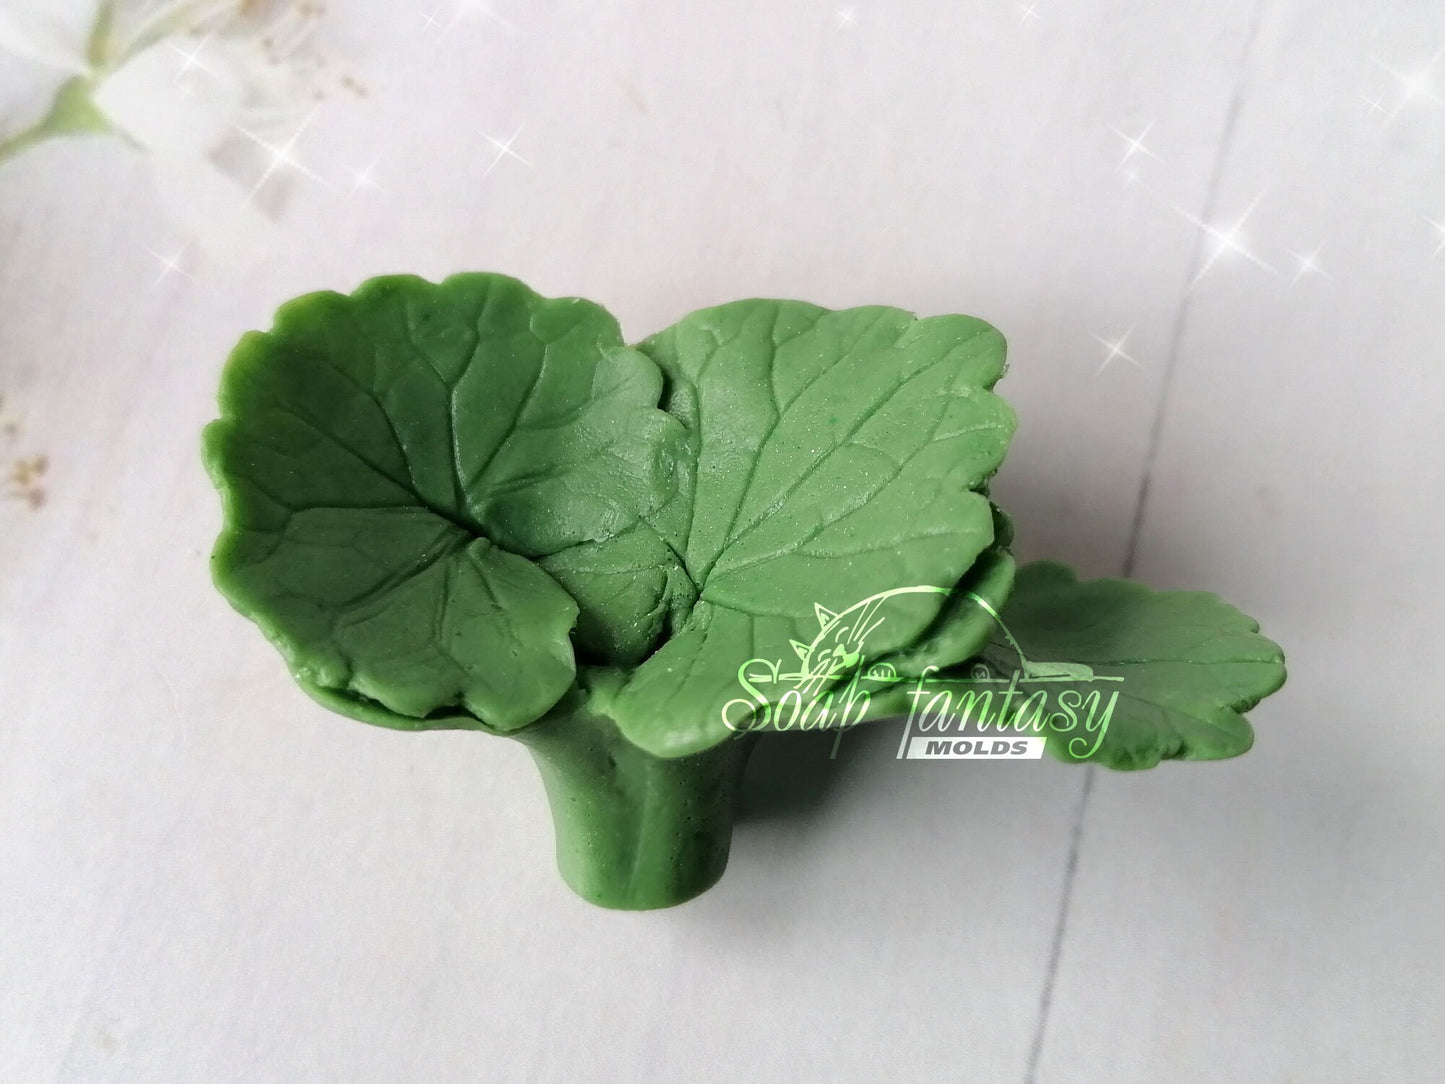 Leafs (bouquet inserts) silicone mold for soap making